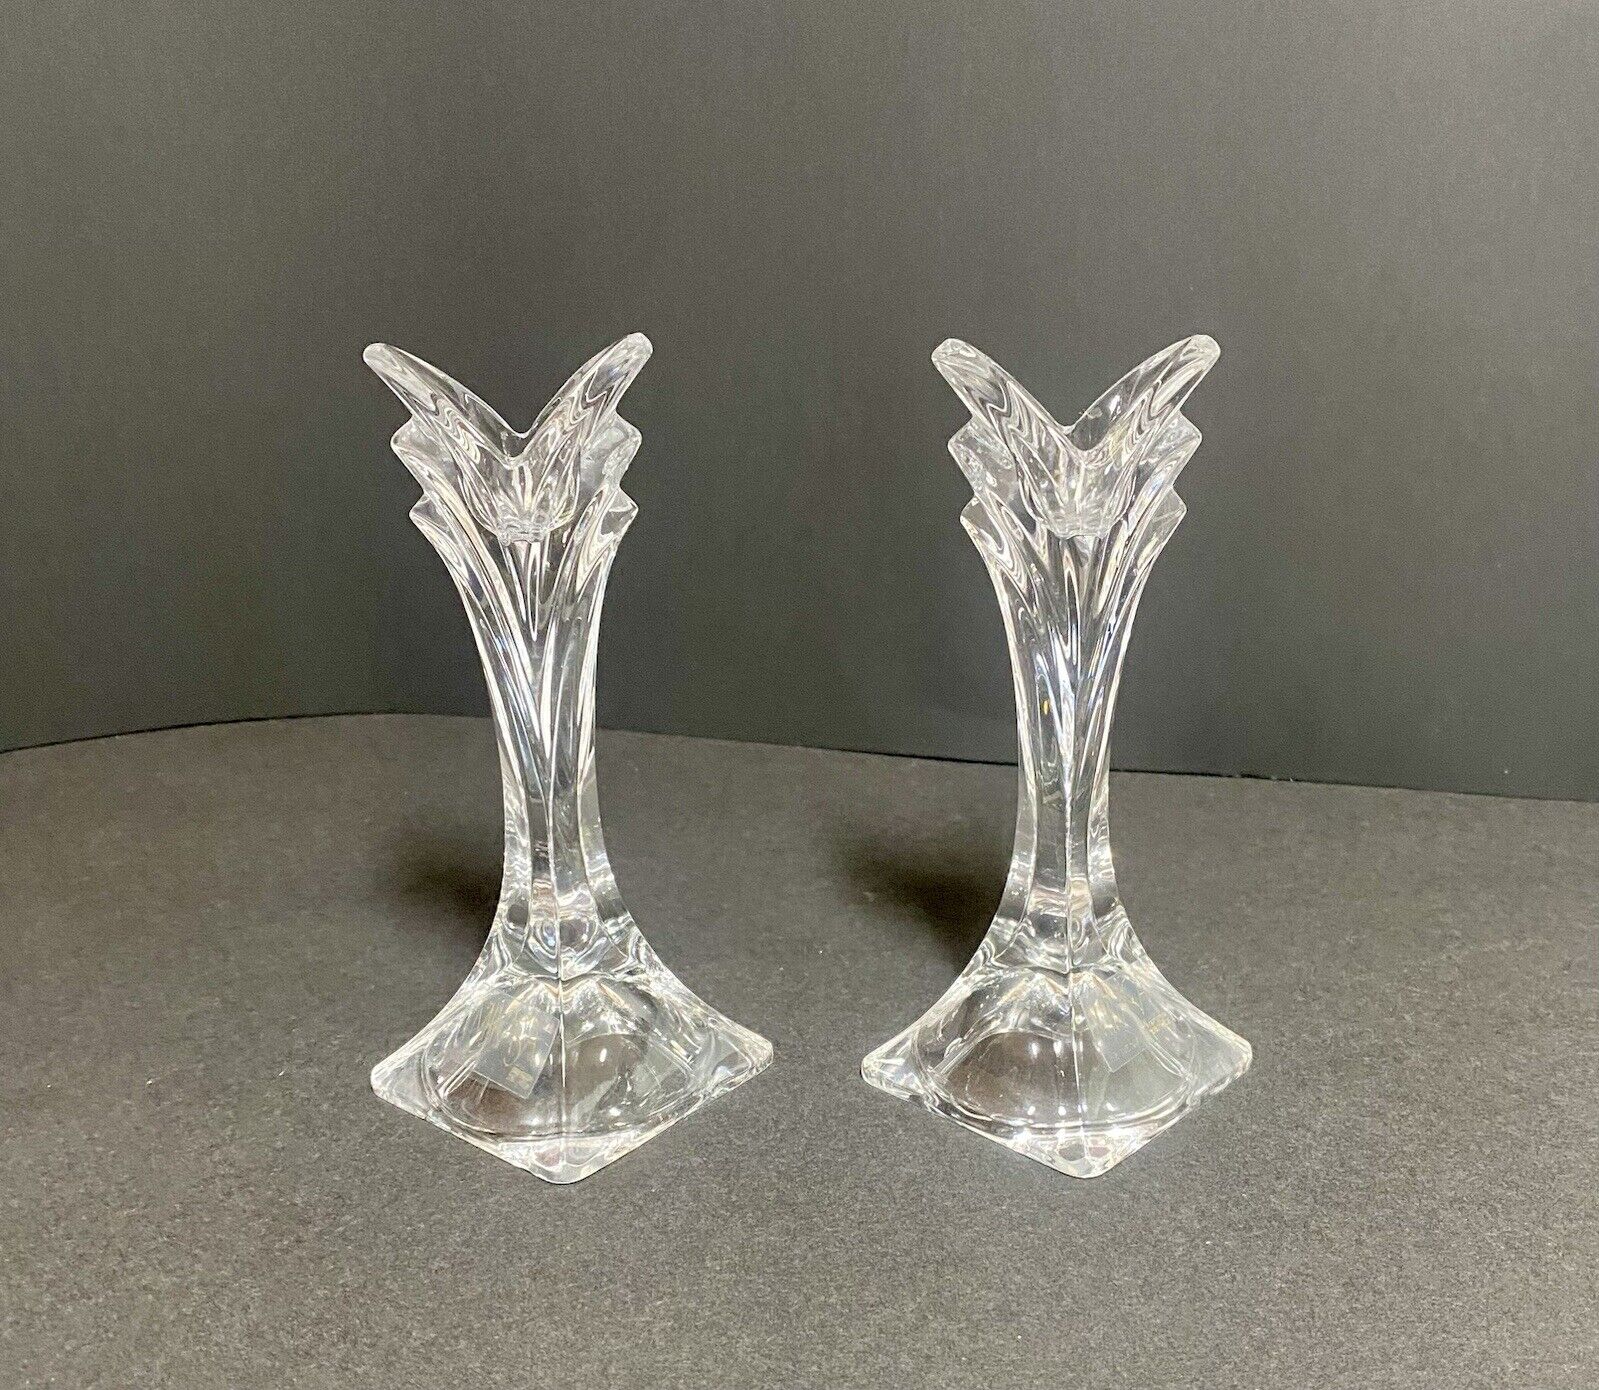 Pair of Vintage Mikasa Art Deco Style Slovenia Crystal Taper Candle Holders